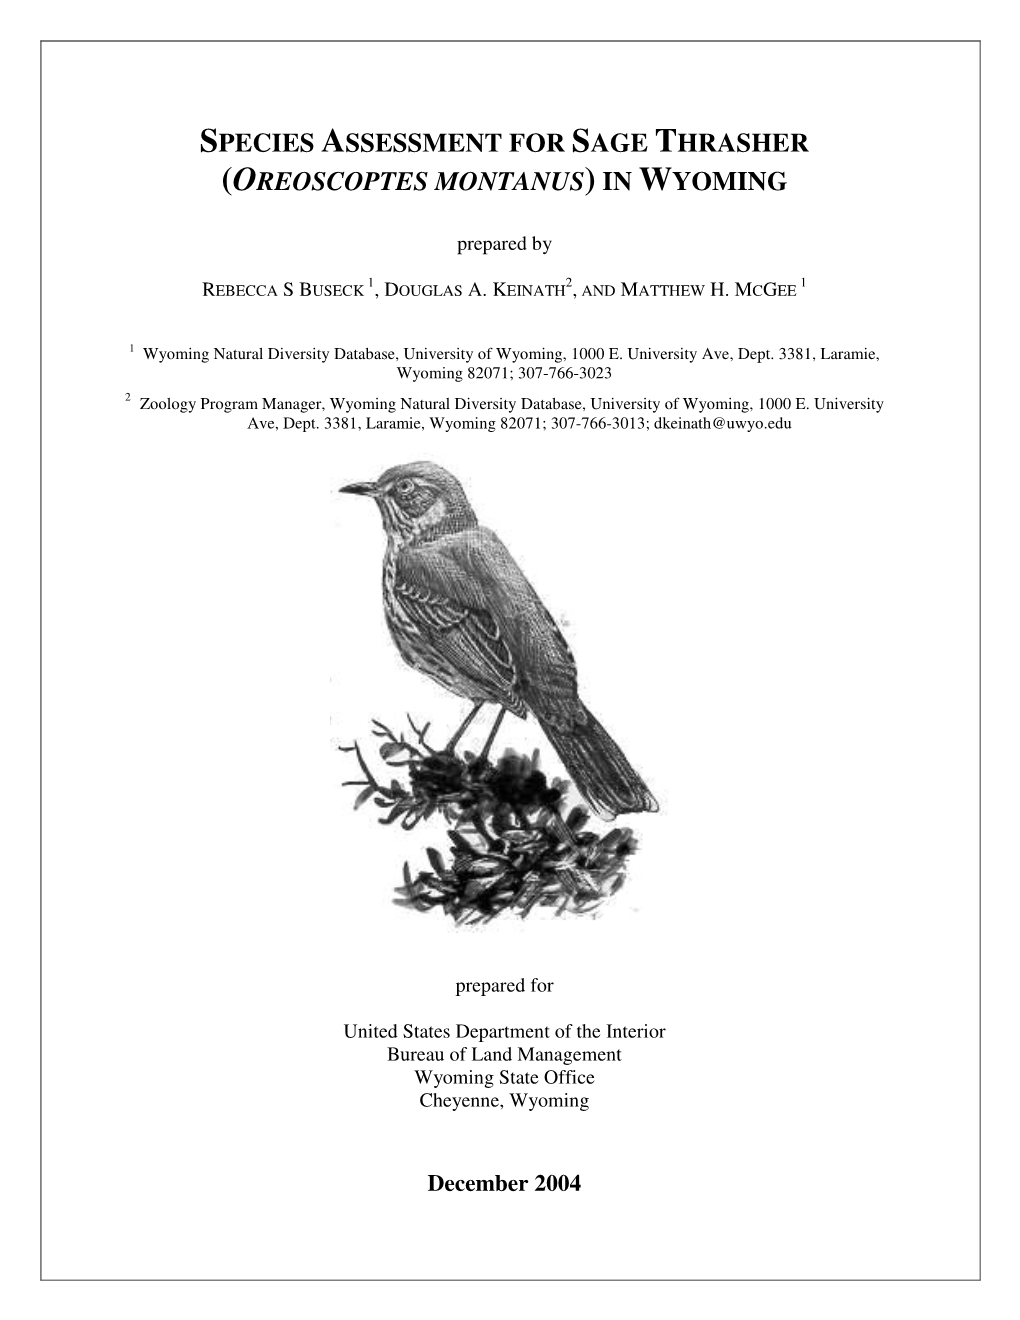 Species Assessment for Sage Thrasher (Oreoscoptes Montanus) in Wyoming